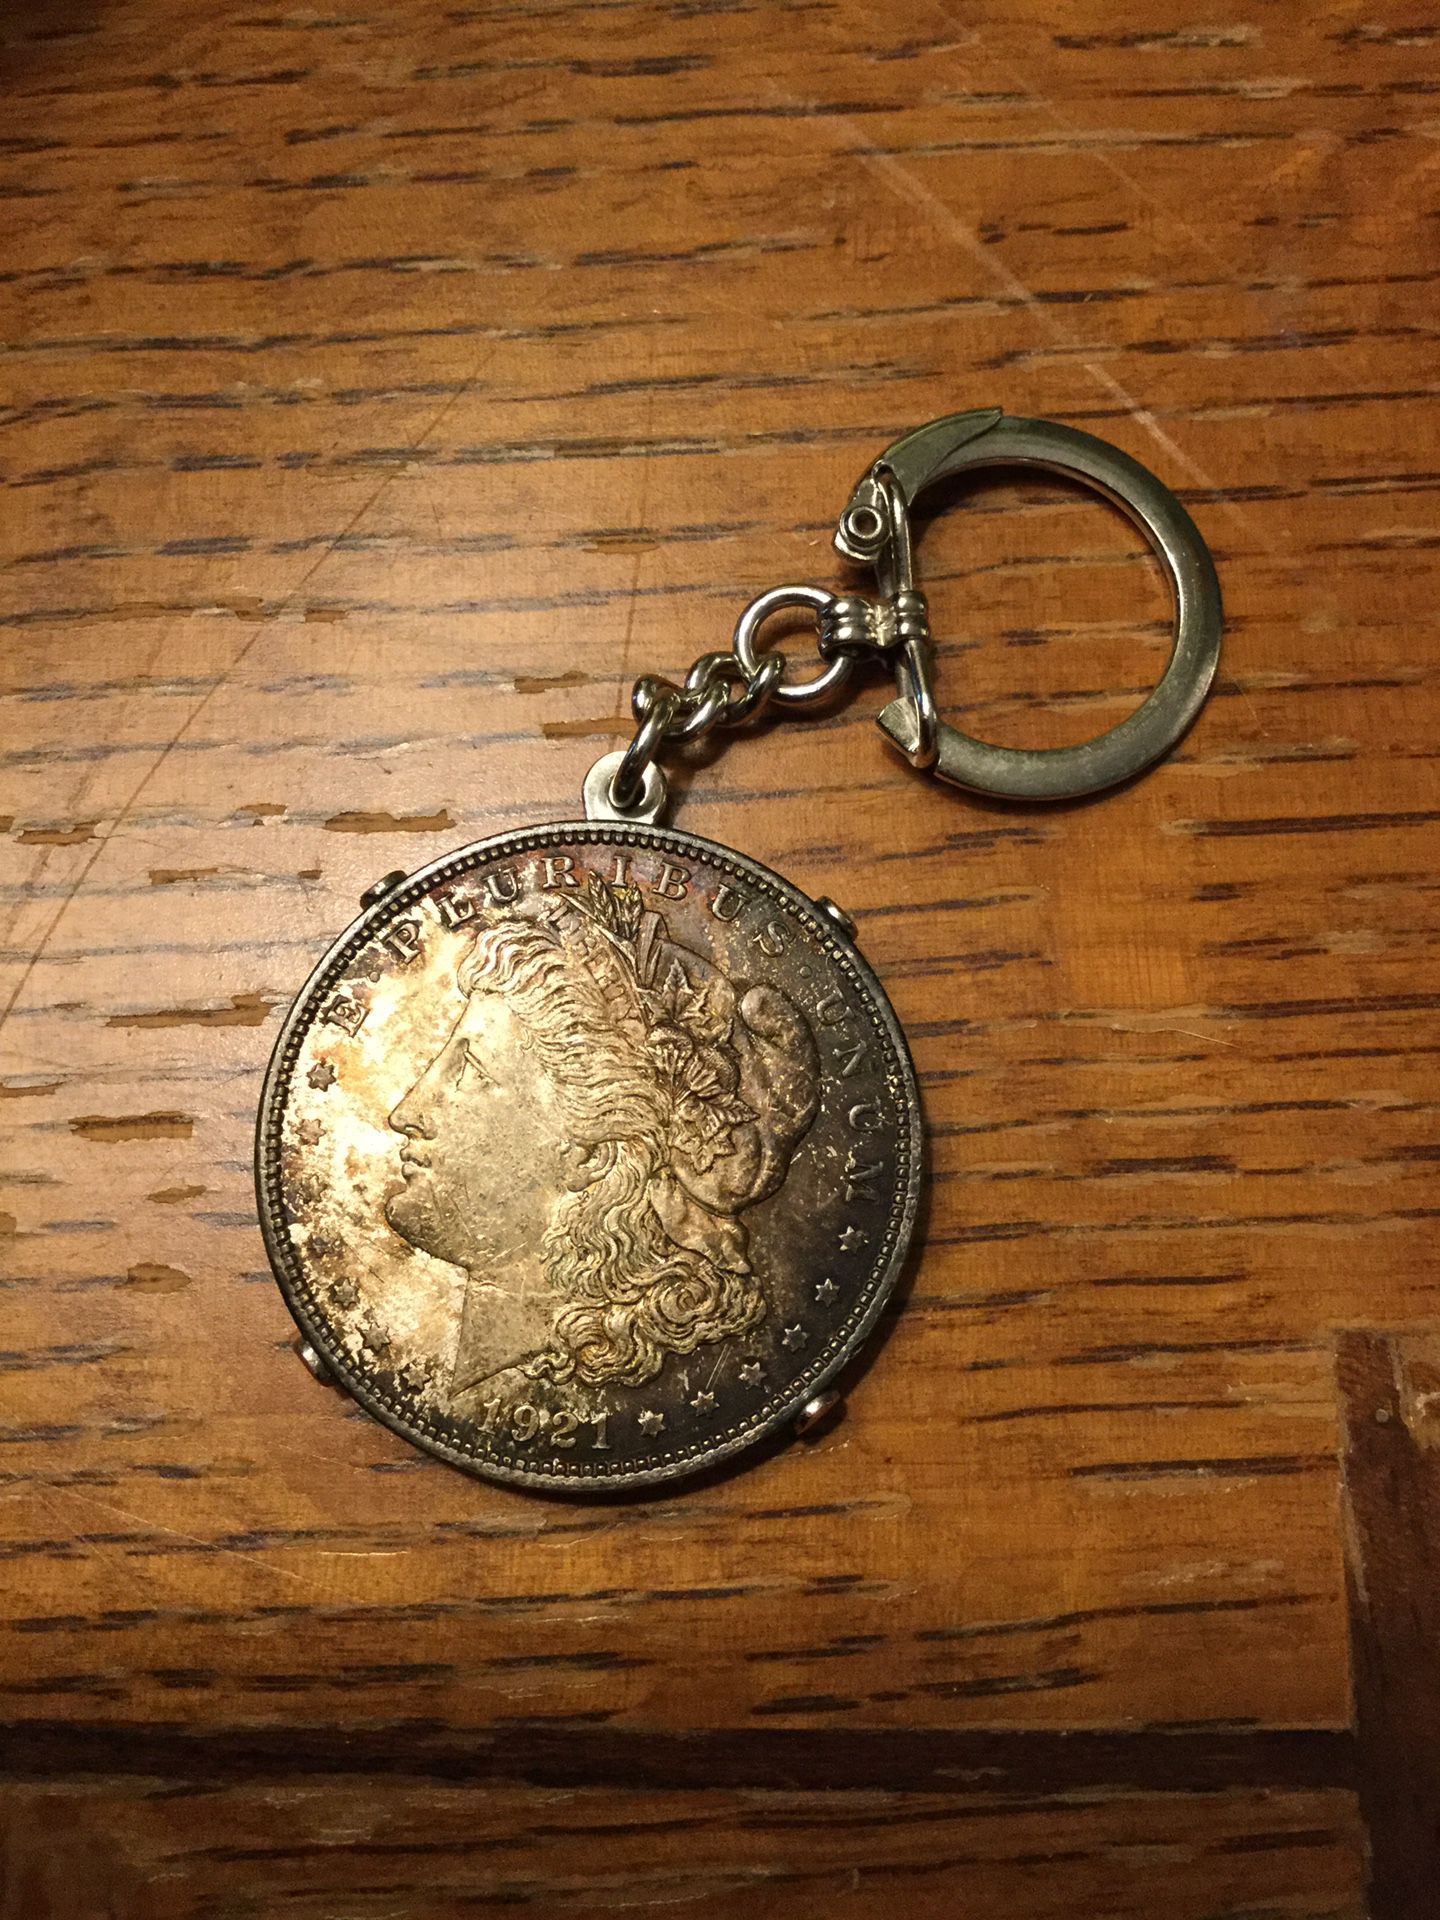 1921 Morgan Silver Dollar Keychain First Federal Savings Chicago Bank Promotional Advertising